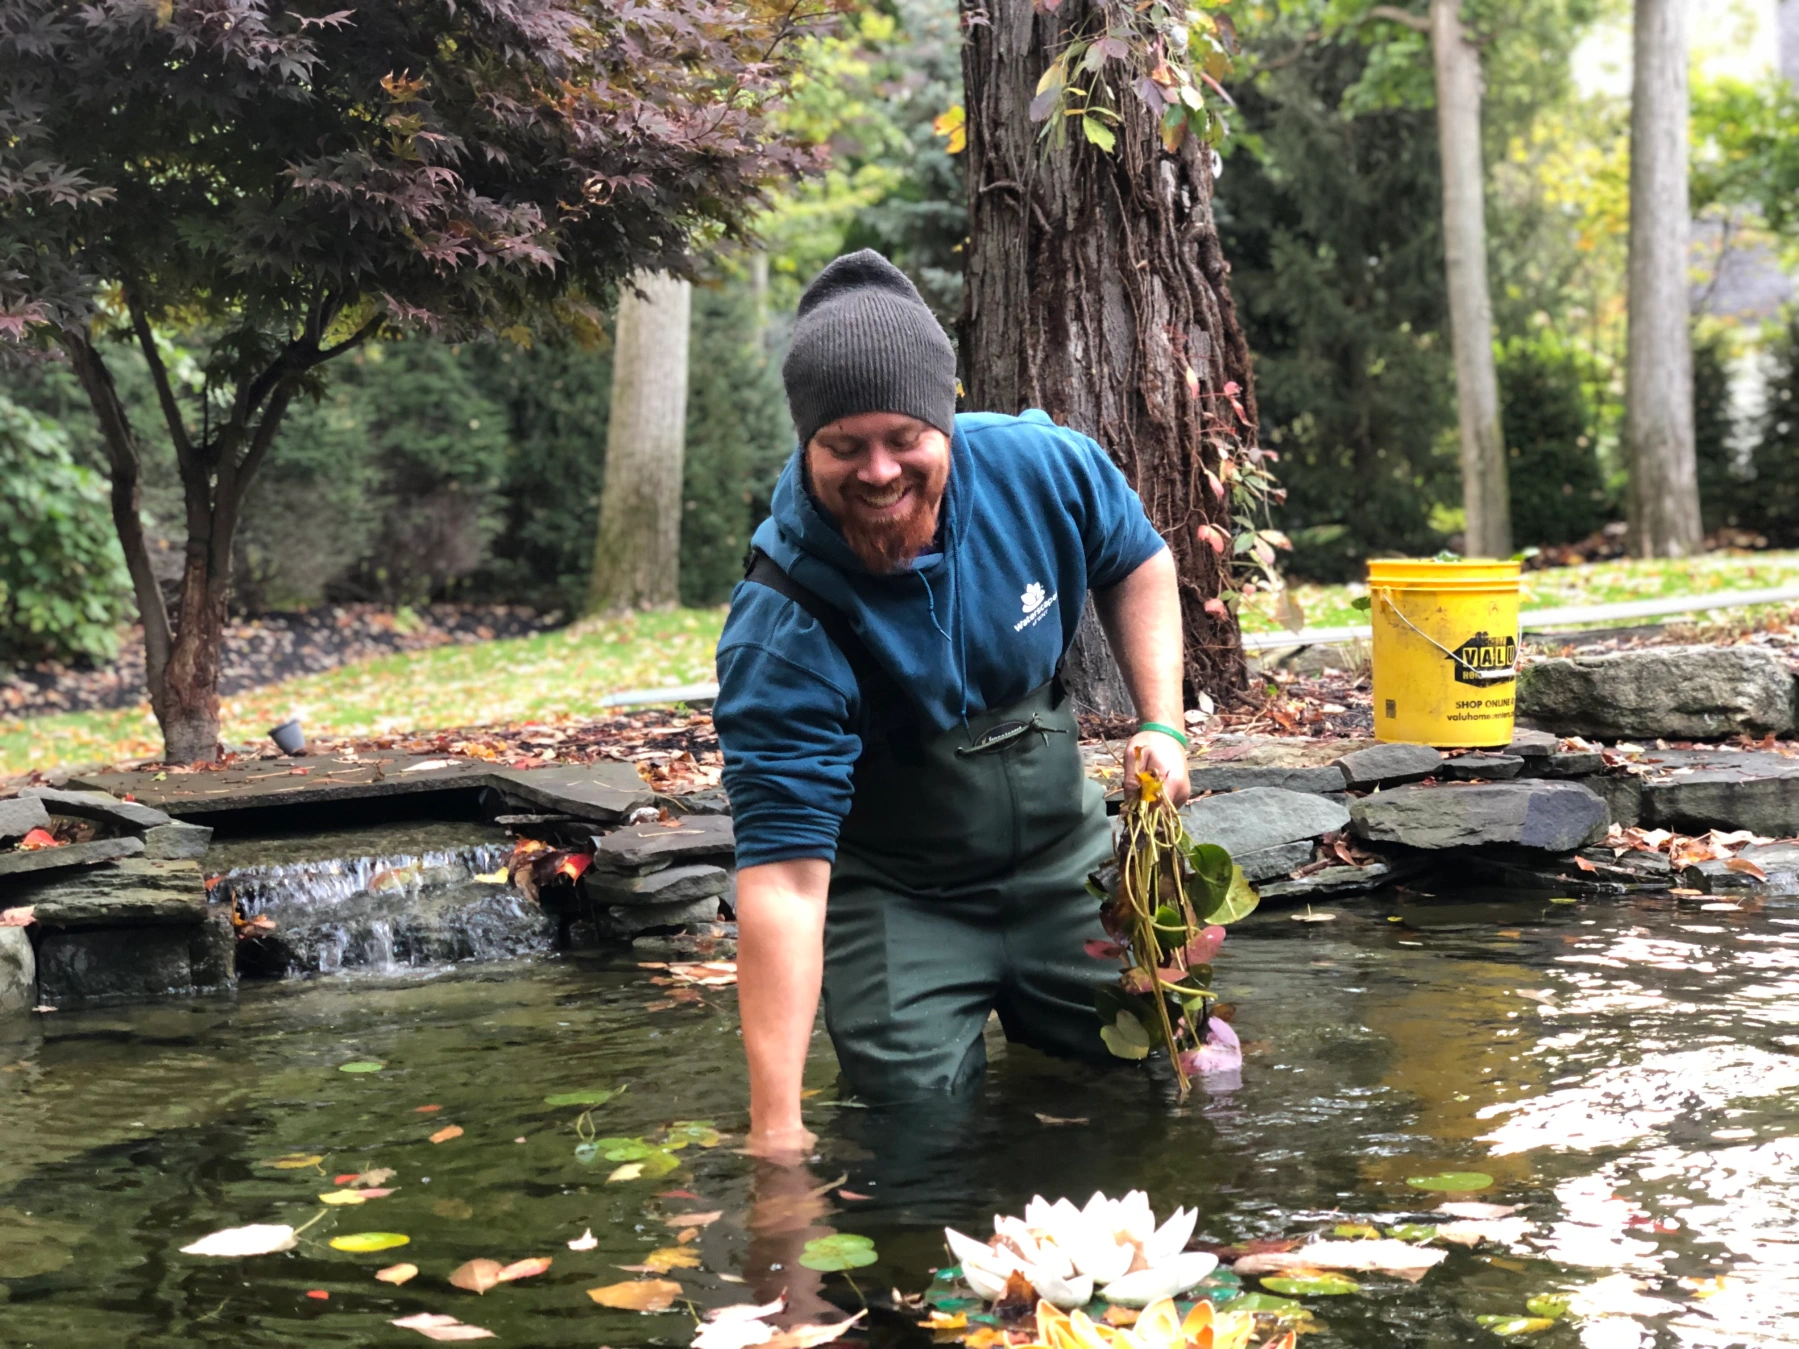 our team cleaning up a pond